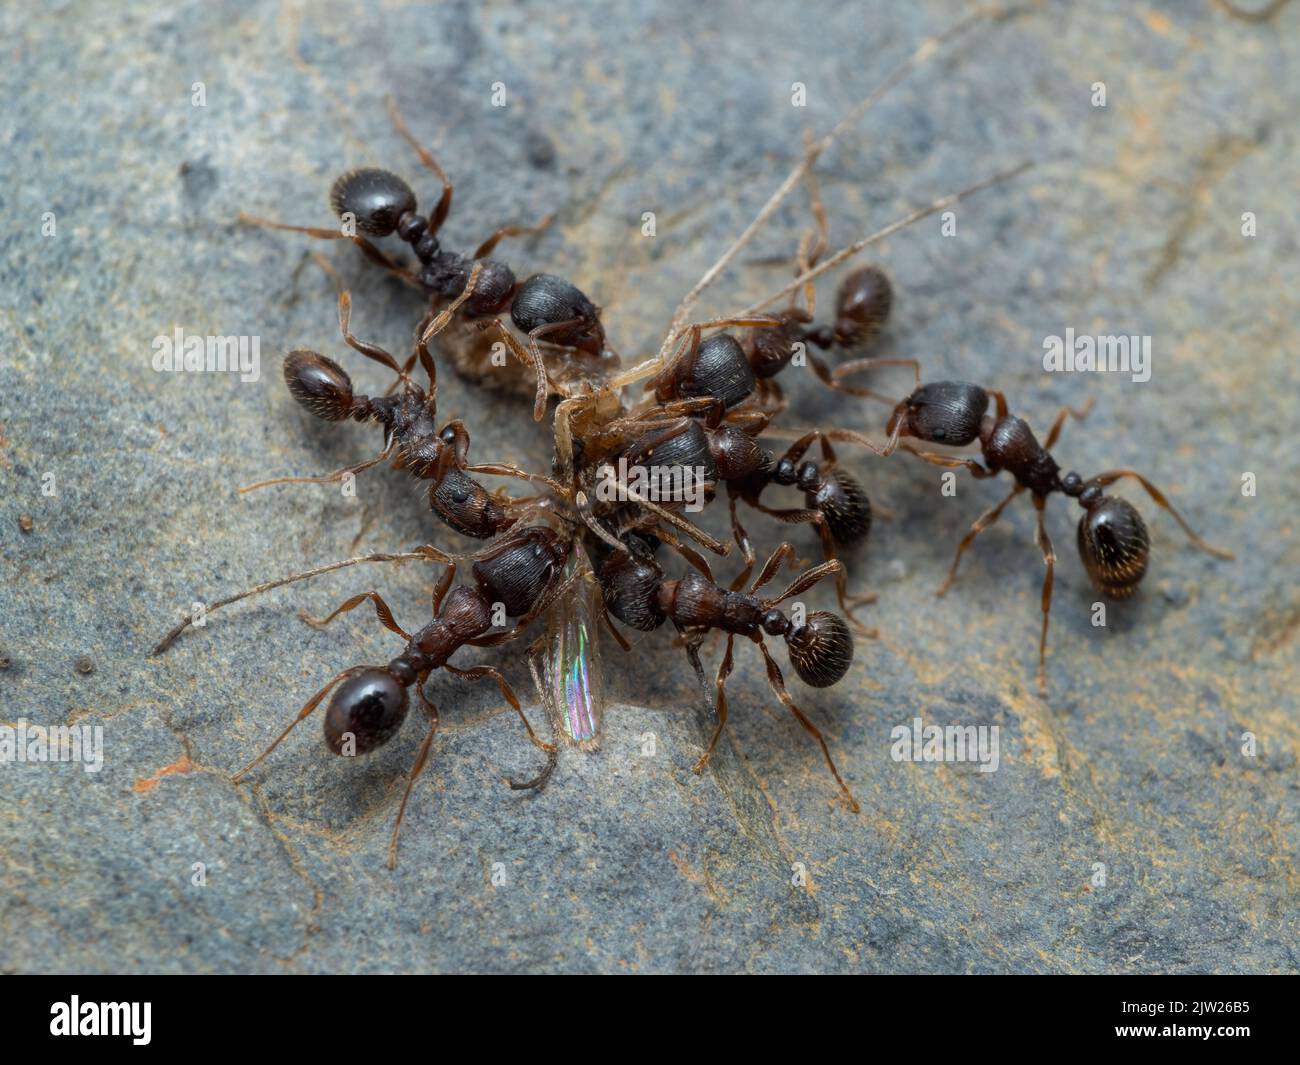 tiny pavement ants (Tetramorium immigrans) swarming and feeding on a mosquito (Aedes) Stock Photo